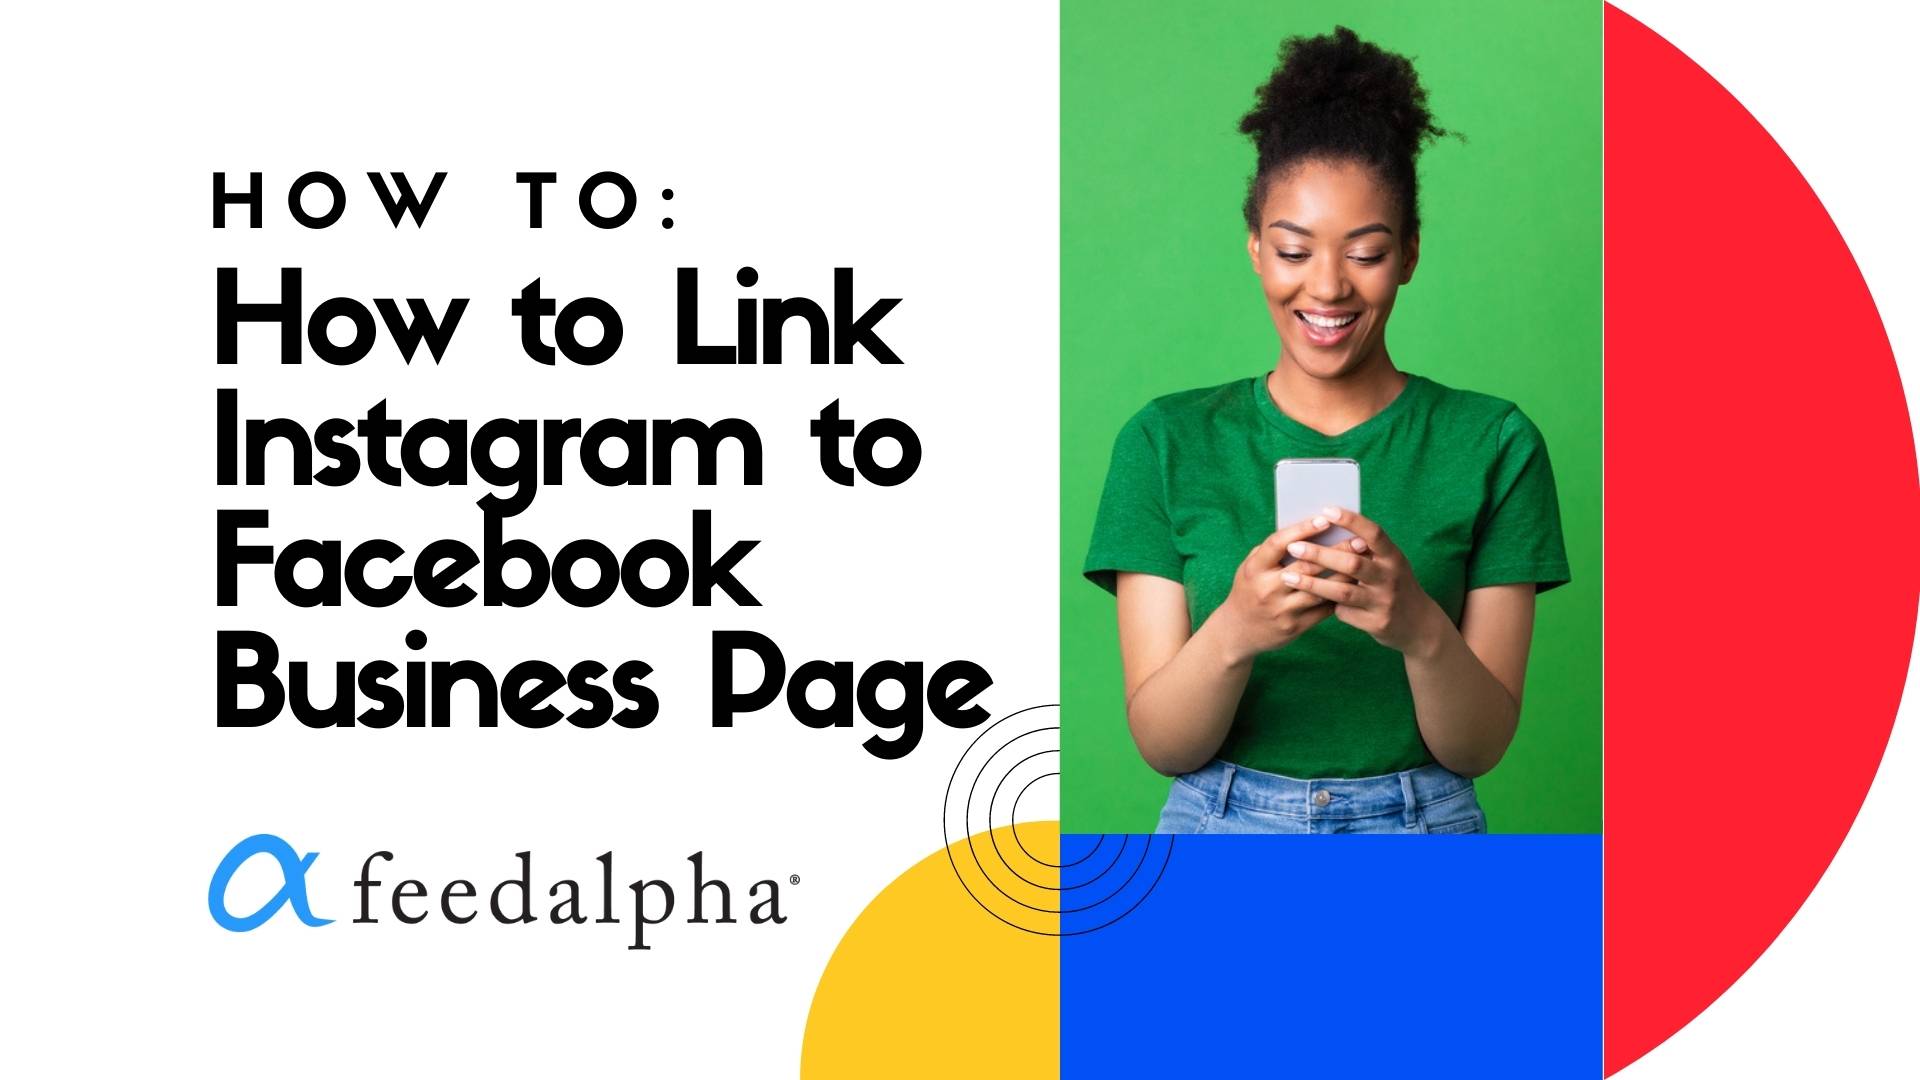 How to link Instagram to Facebook business page